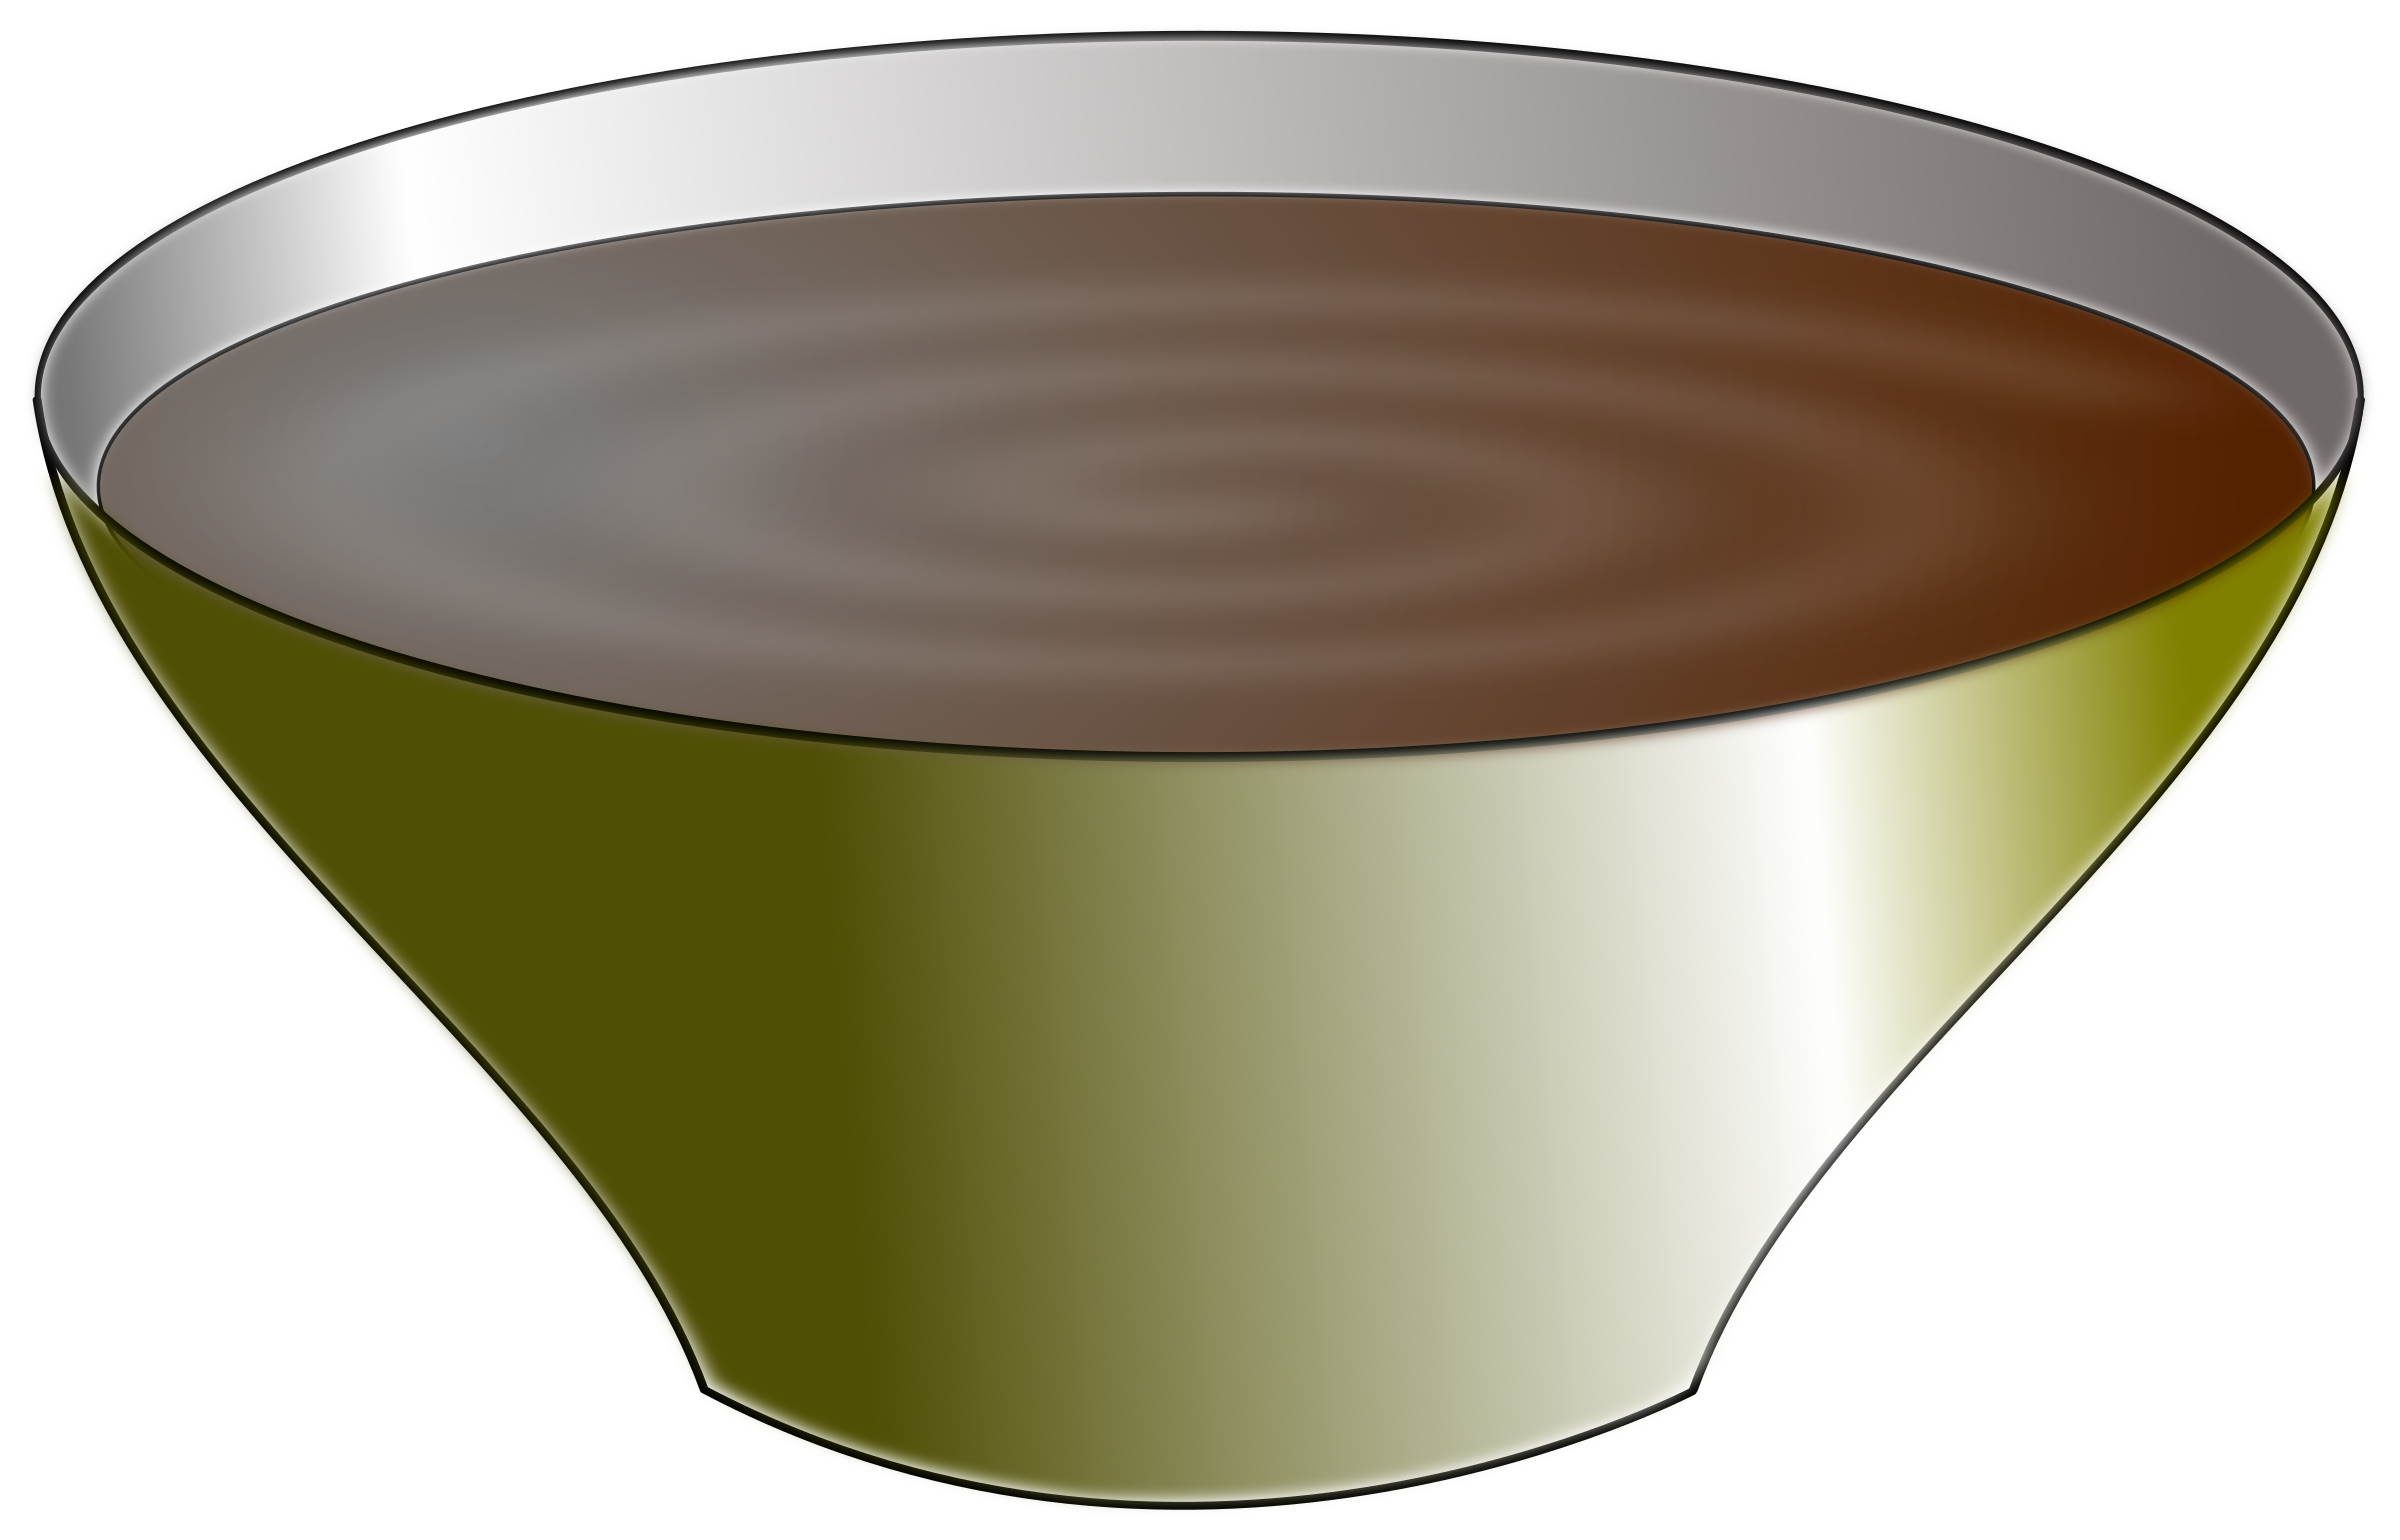 Bowl with Soup vector clipart image.